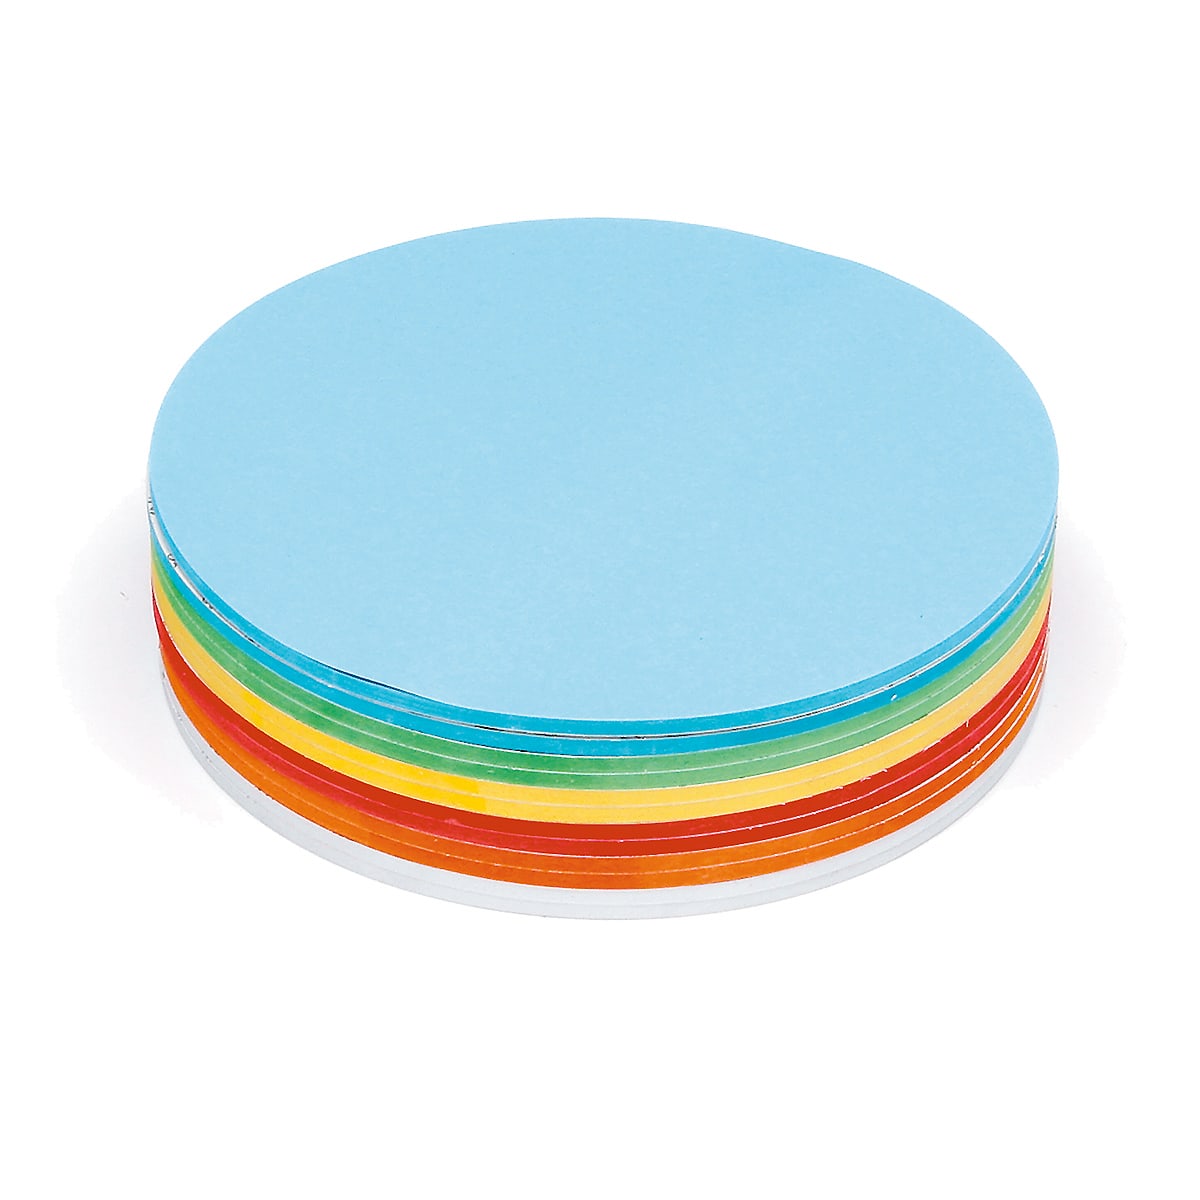 Stick-It Cards, large circular, 300 sheets, assorted